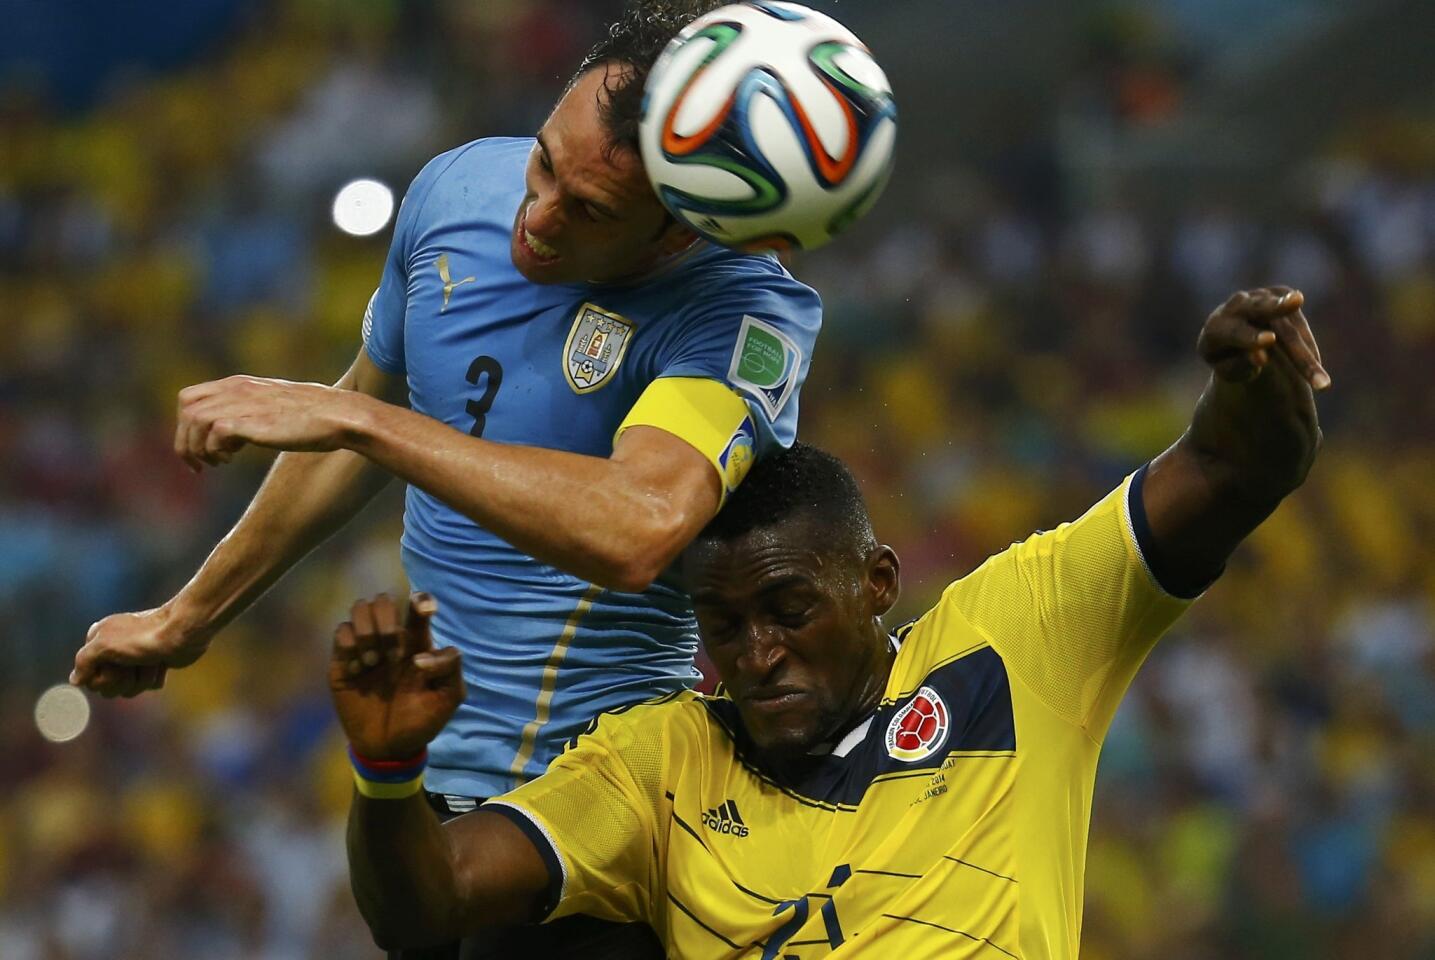 Uruguay's Godin fights to head the ball with Colombia's Martinez during their 2014 World Cup round of 16 game at the Maracana stadium in Rio de Janeiro